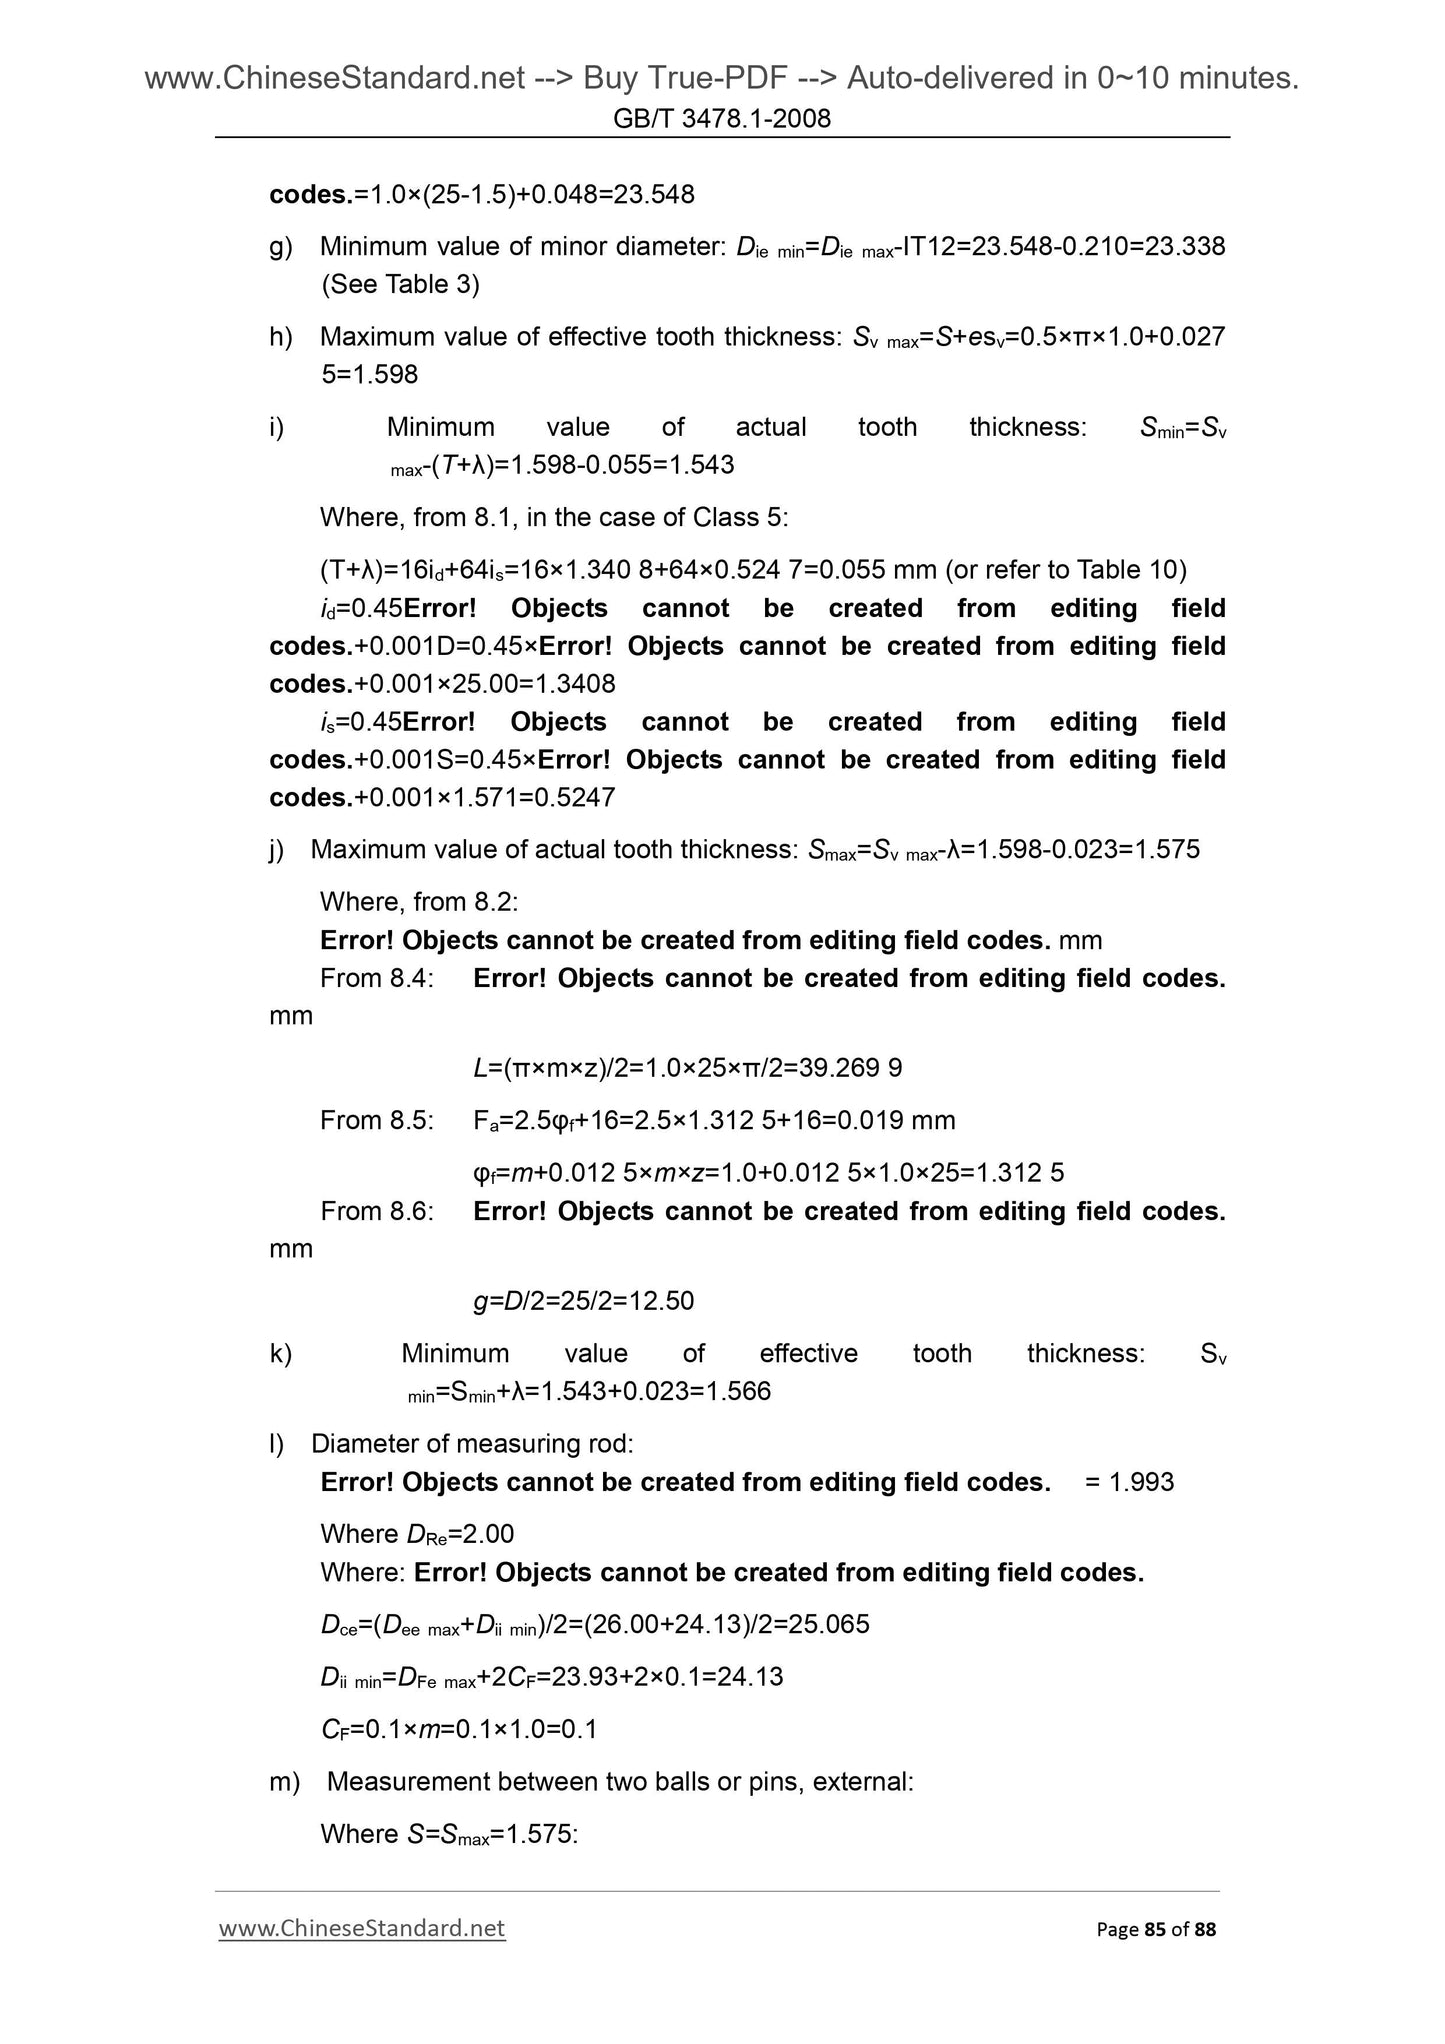 GB/T 3478.1-2008 Page 12